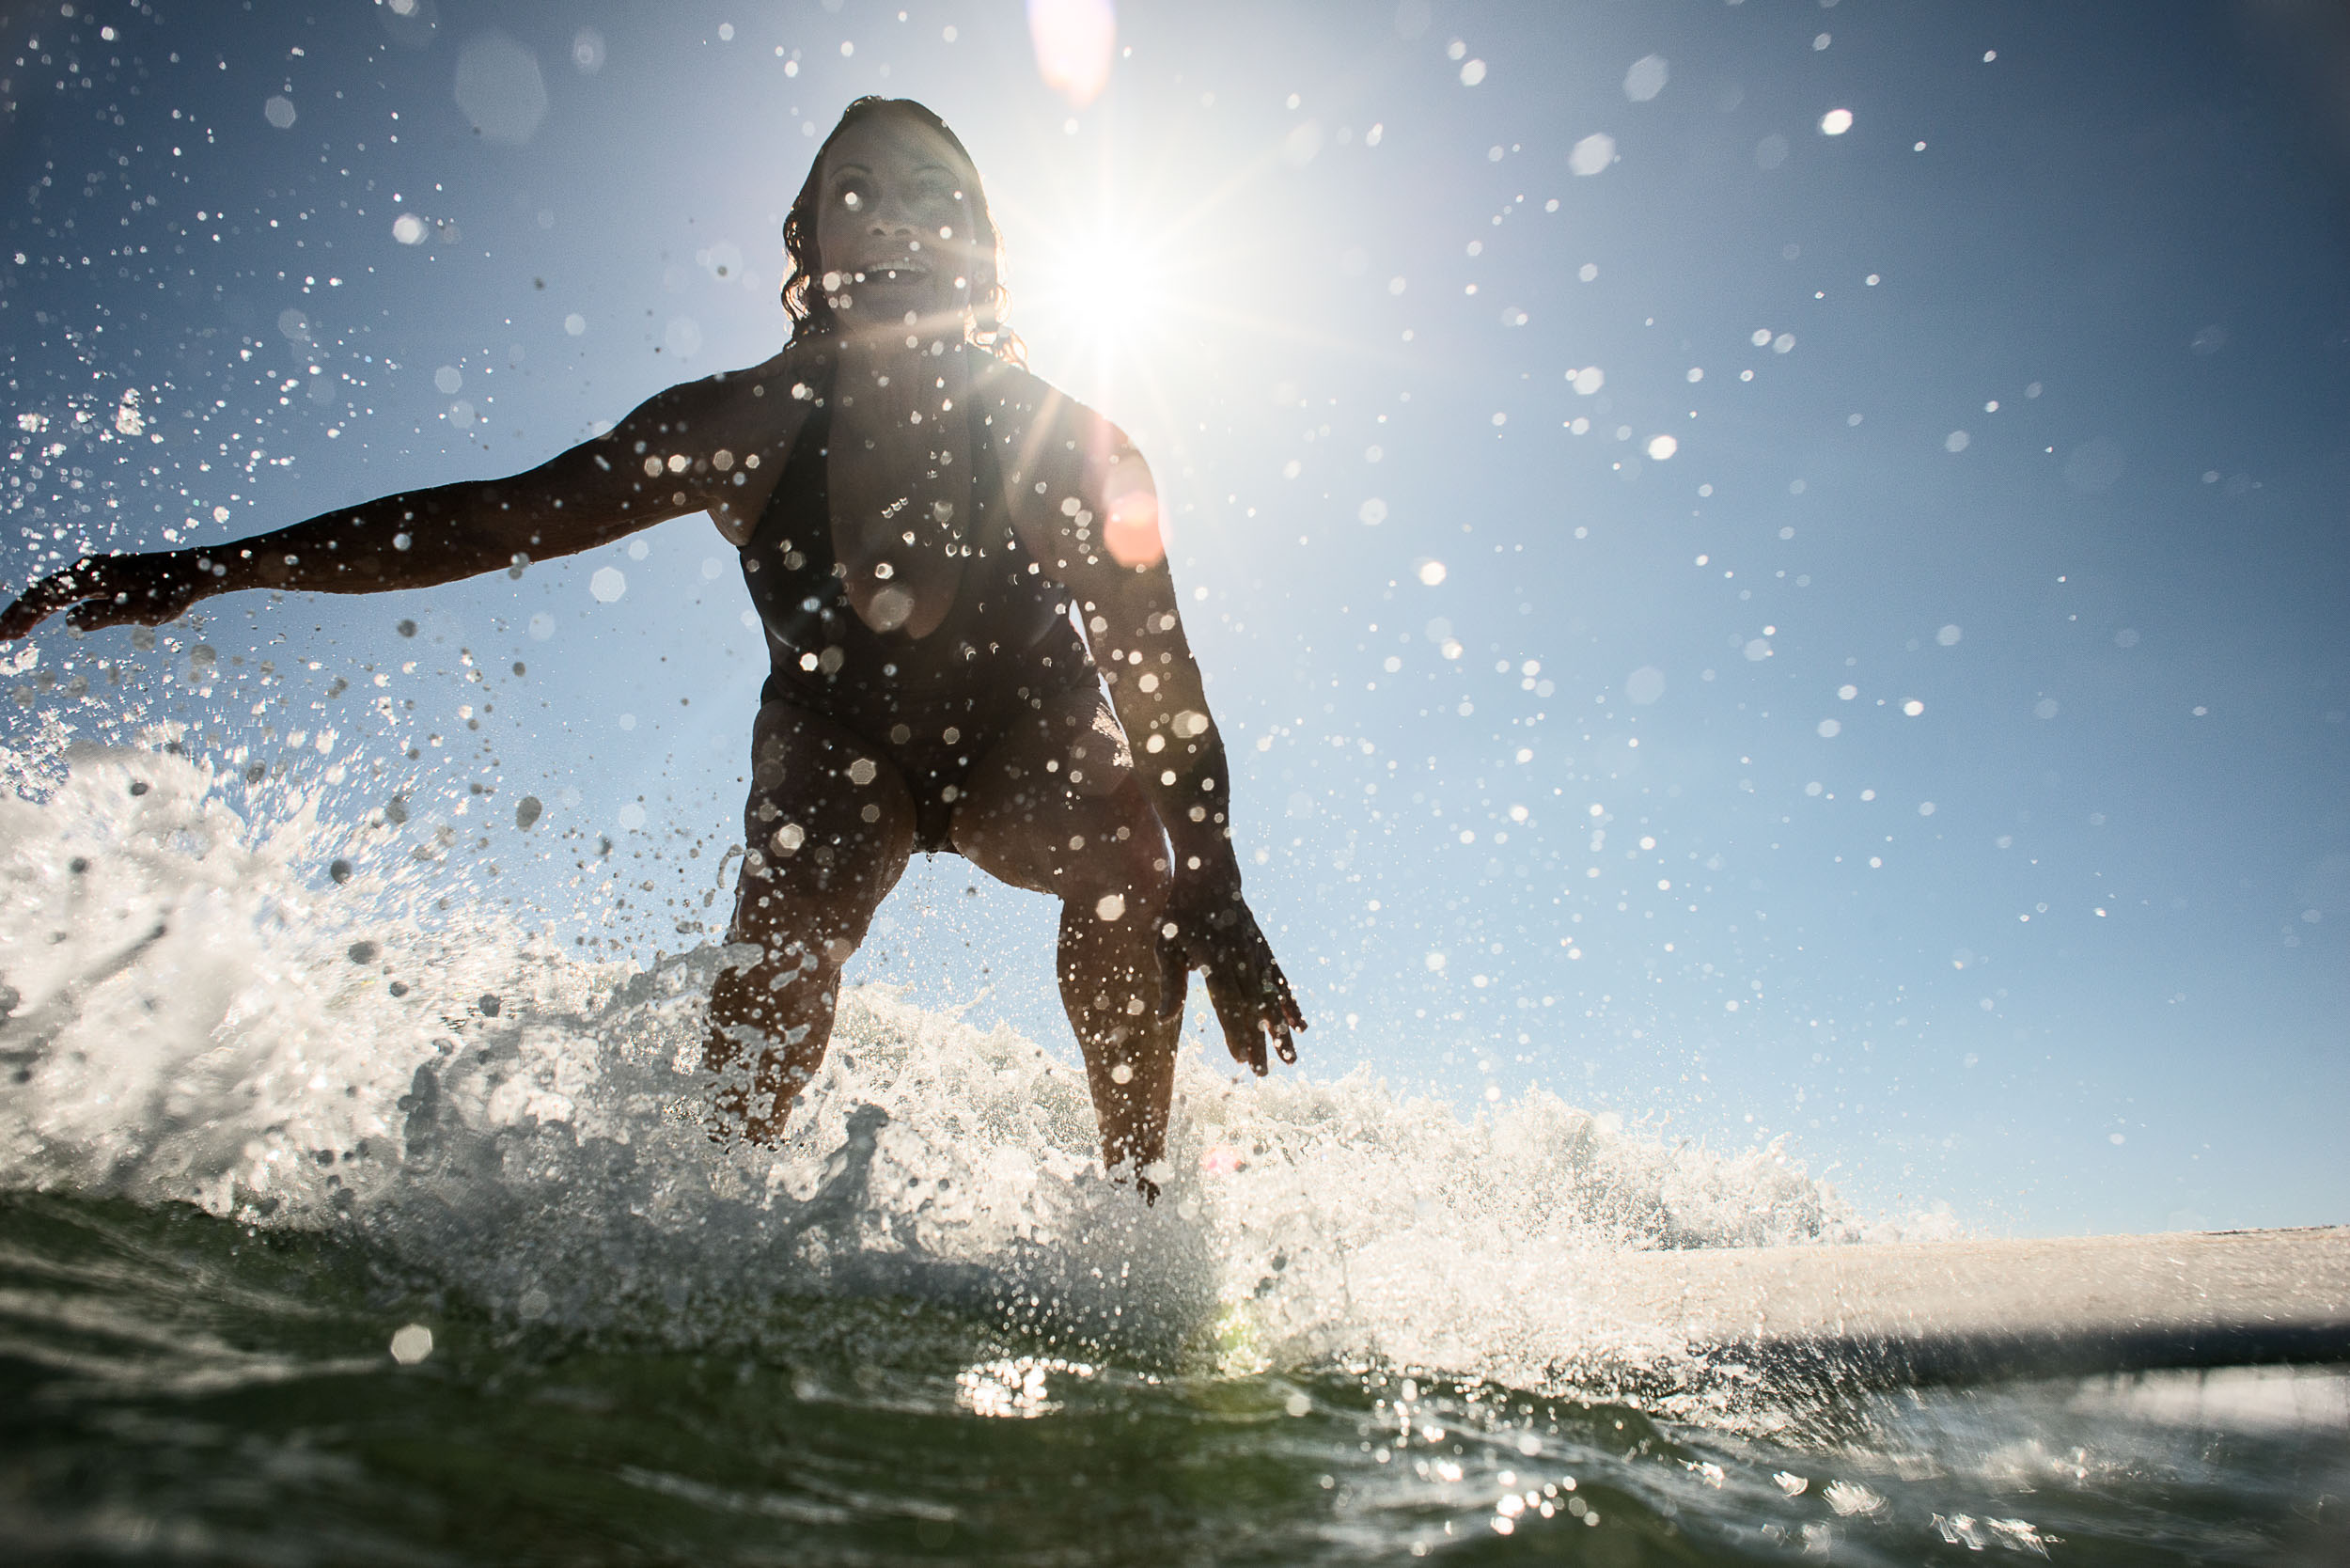 An older woman surfer catches a wave in Doheny State Beach, Calif.